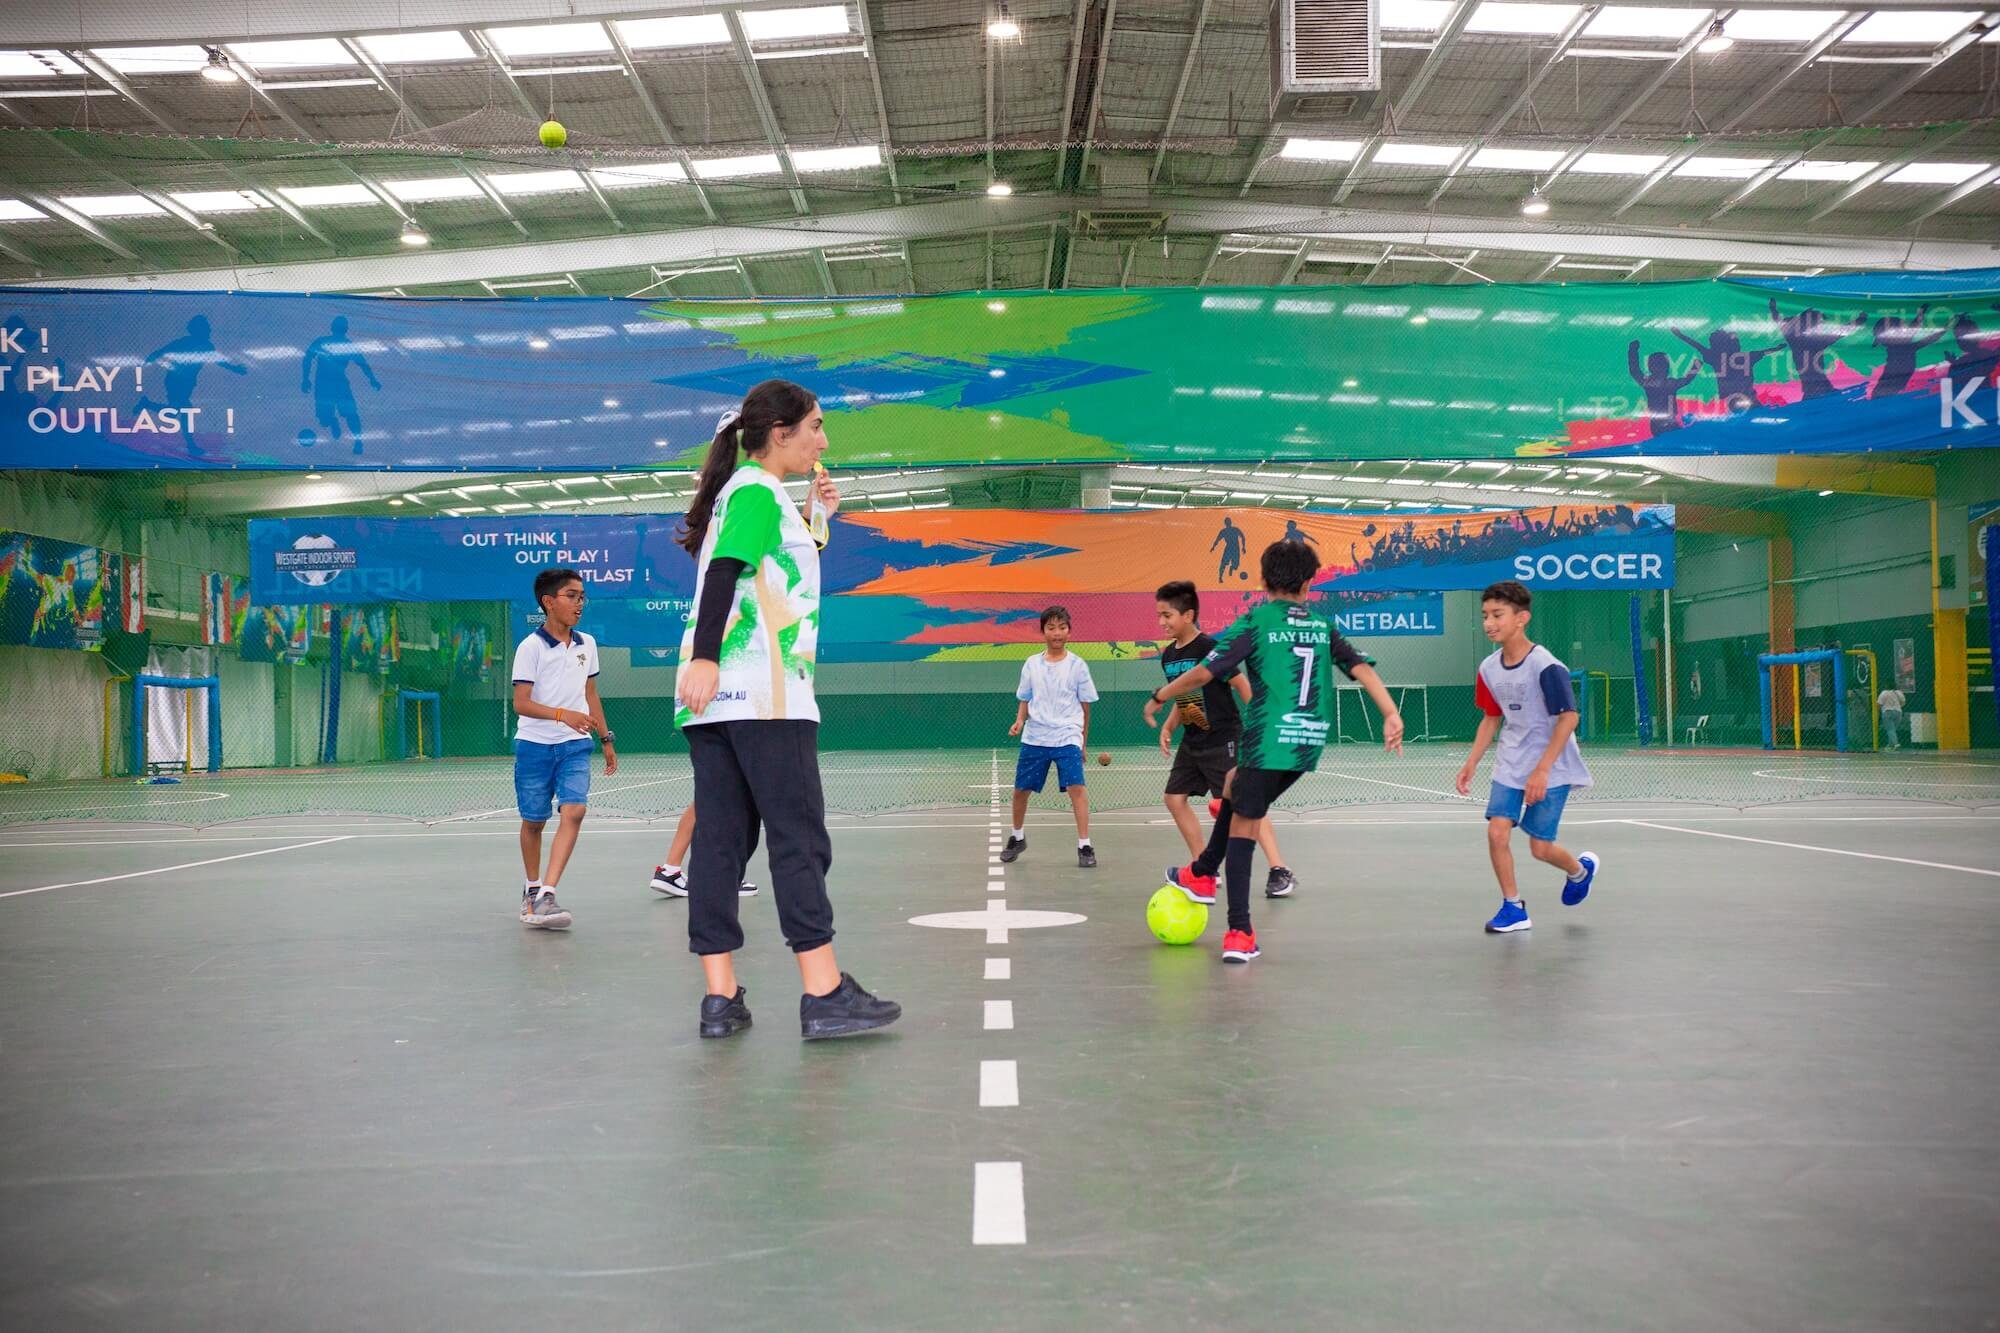 Boys Playing Indoor Soccer at Westgate - Westgate Sports & Leisure Centre.jpg